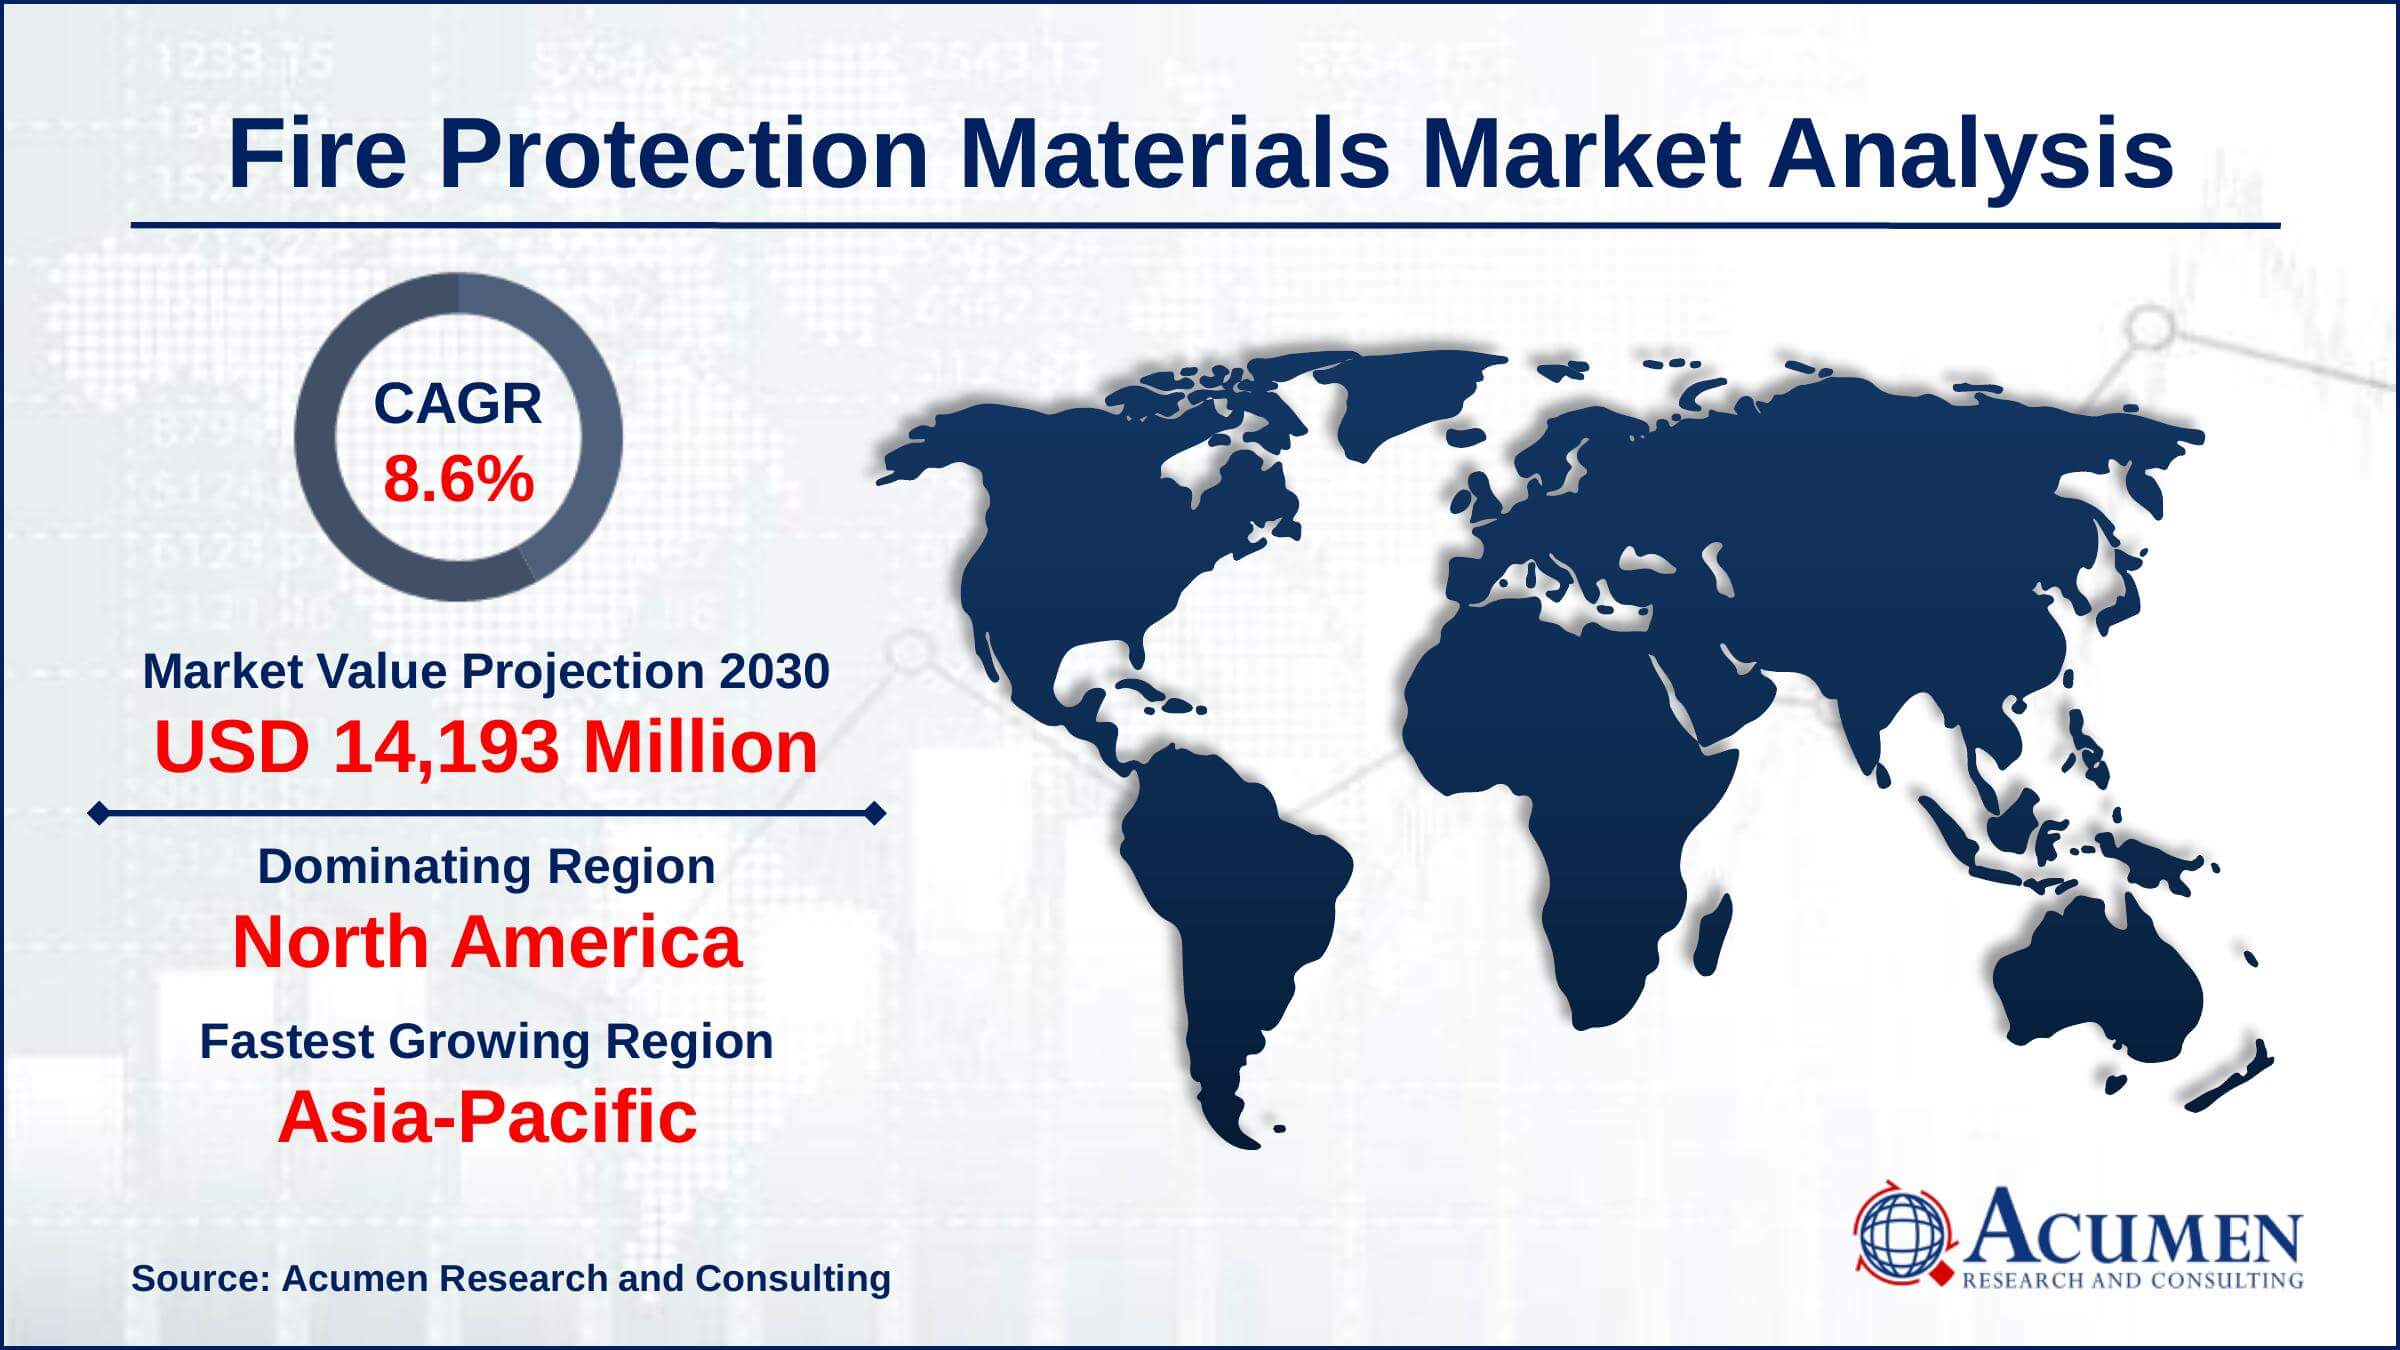 Asia-Pacific fire protection materials market growth will observe highest CAGR from 2022 to 2030